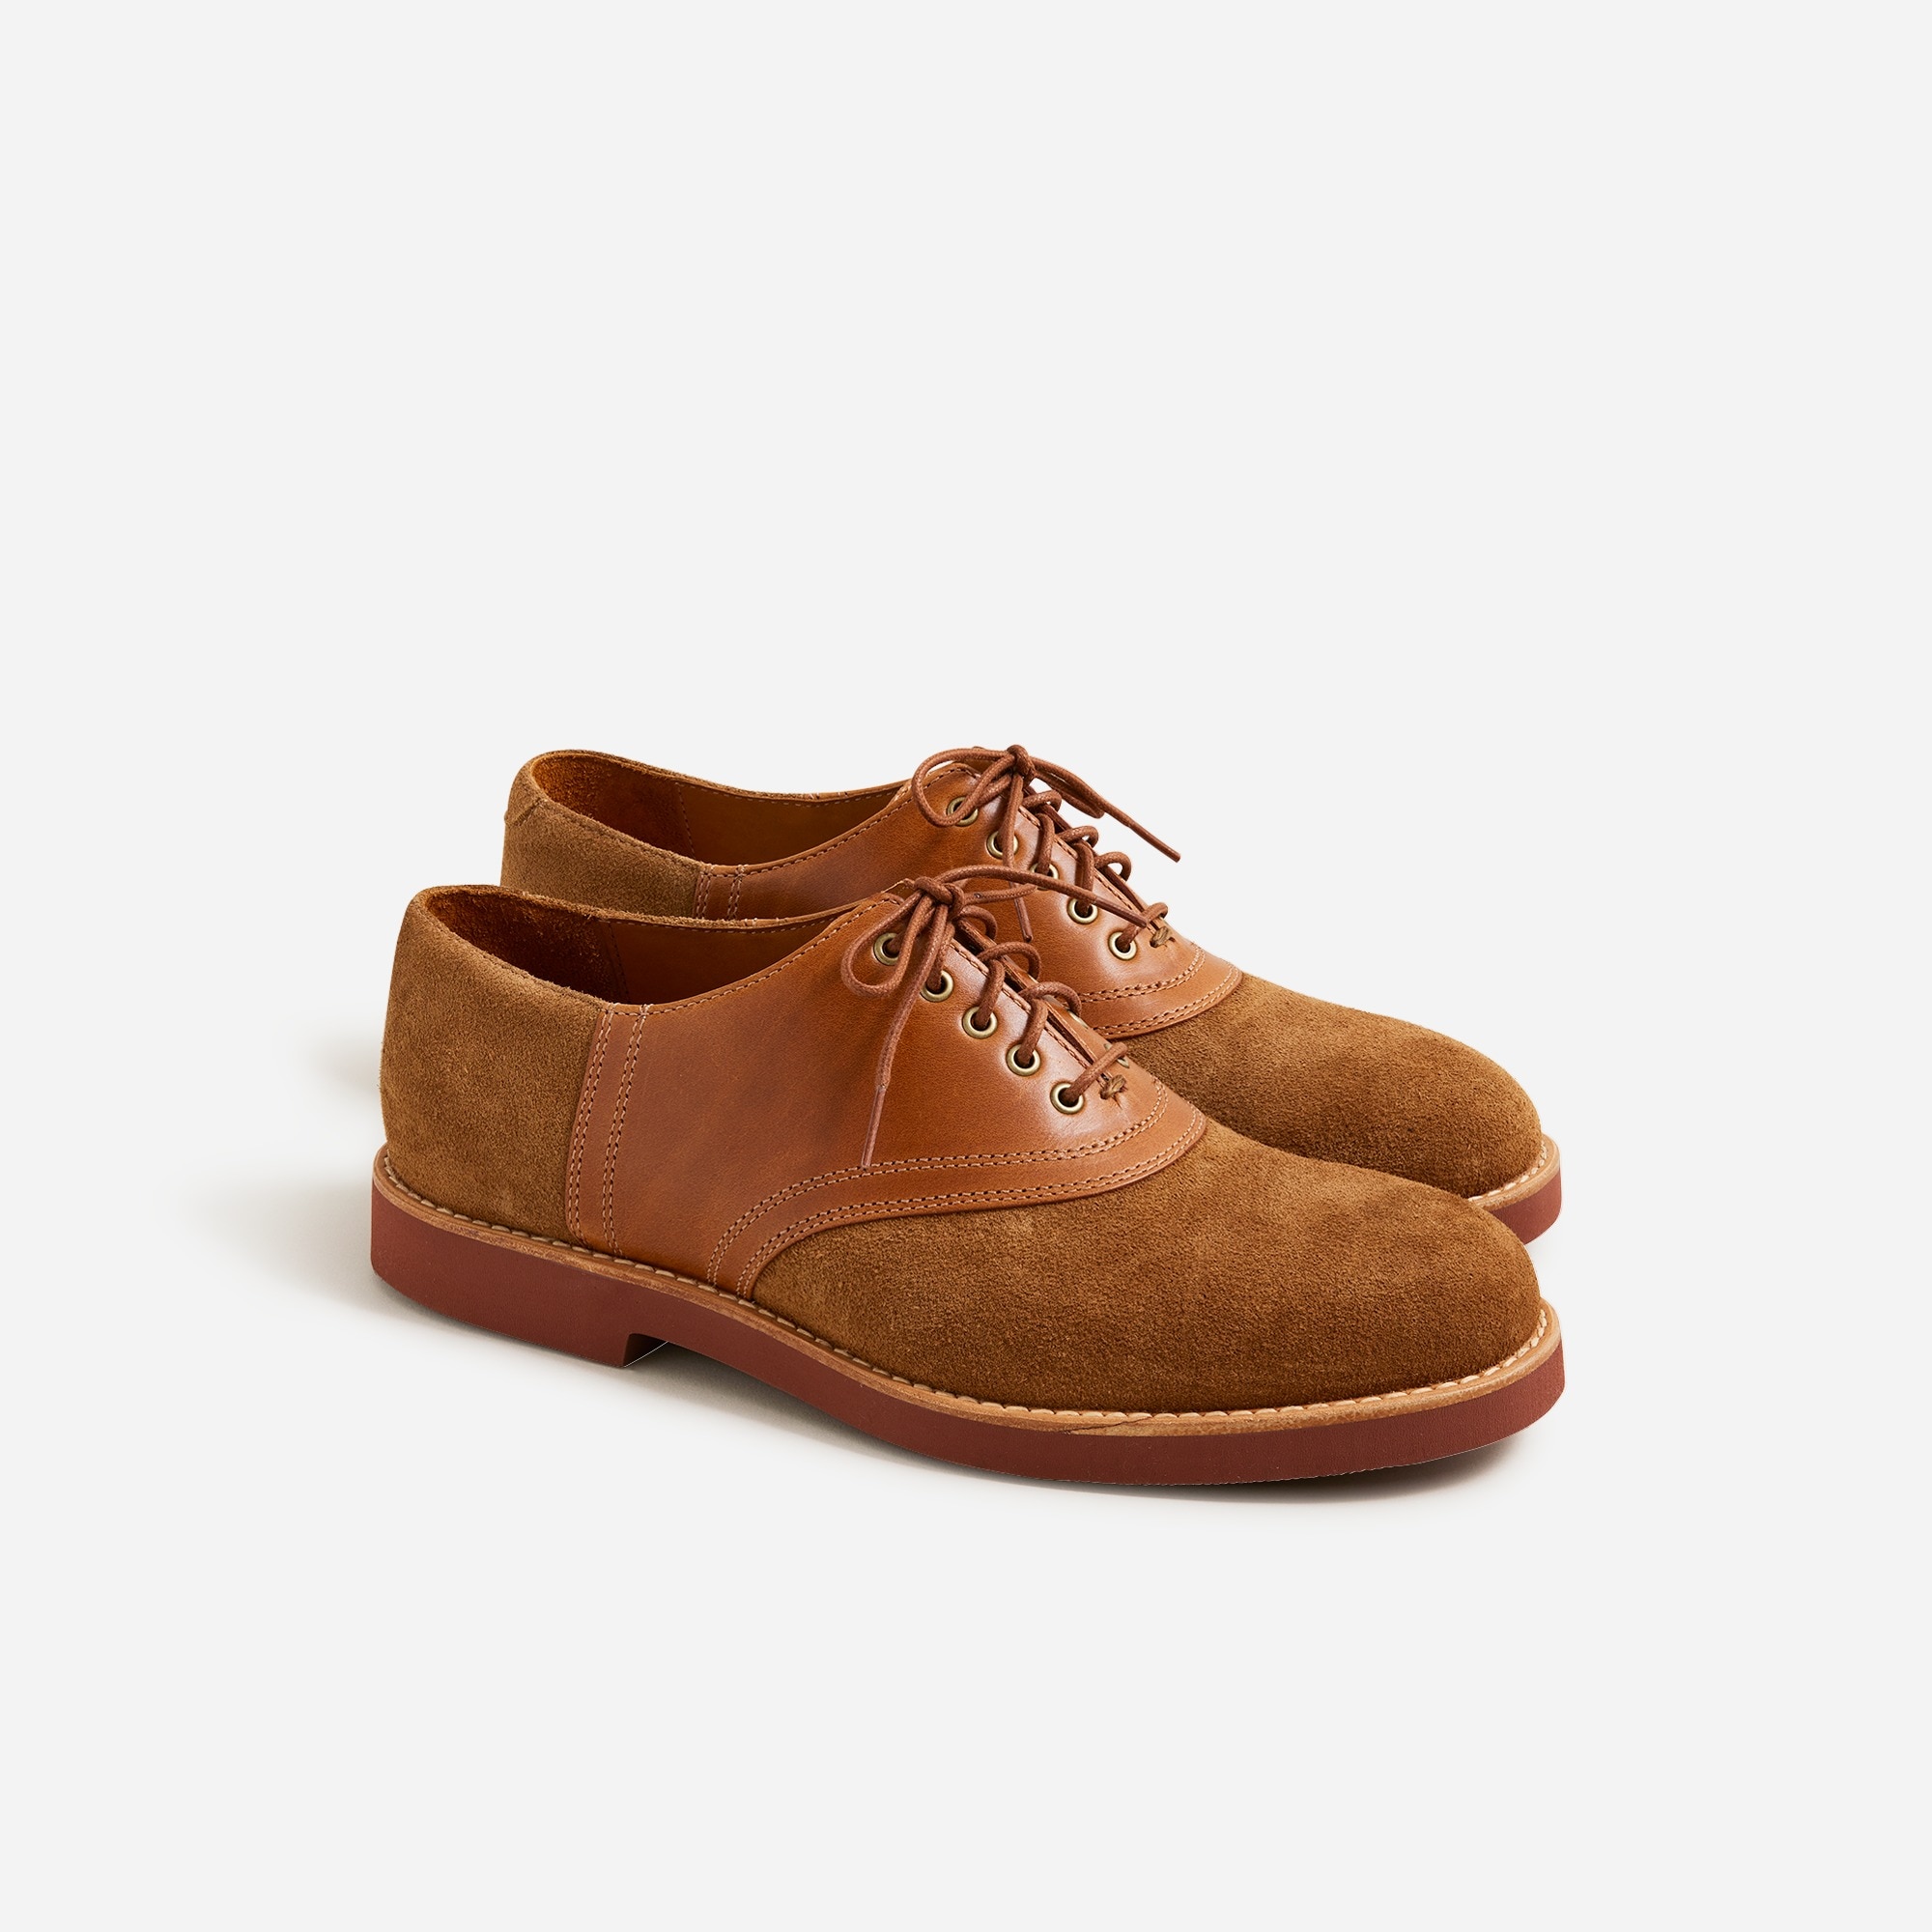 mens Pre-order Saddle shoes in leather and English suede